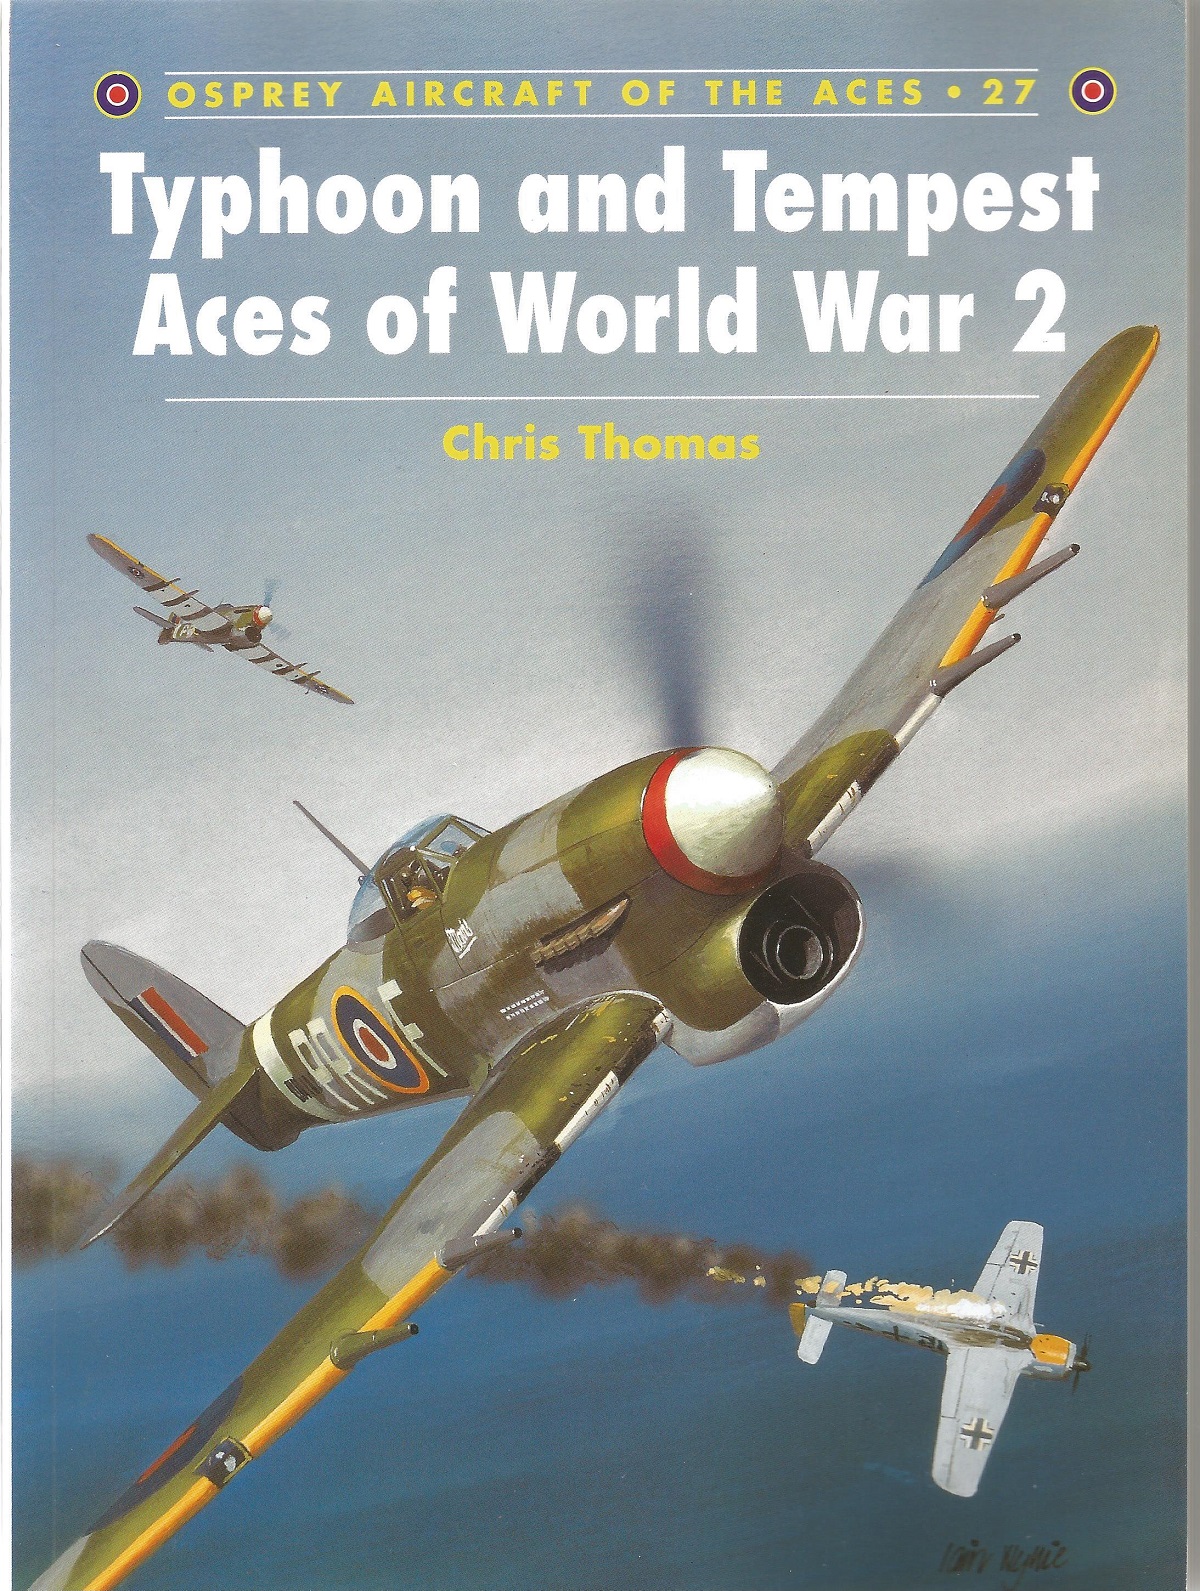 Chris Thomas. Typhoon and Tempest Aces of World War 2. A WW2 First Edition paperback book. Signed on